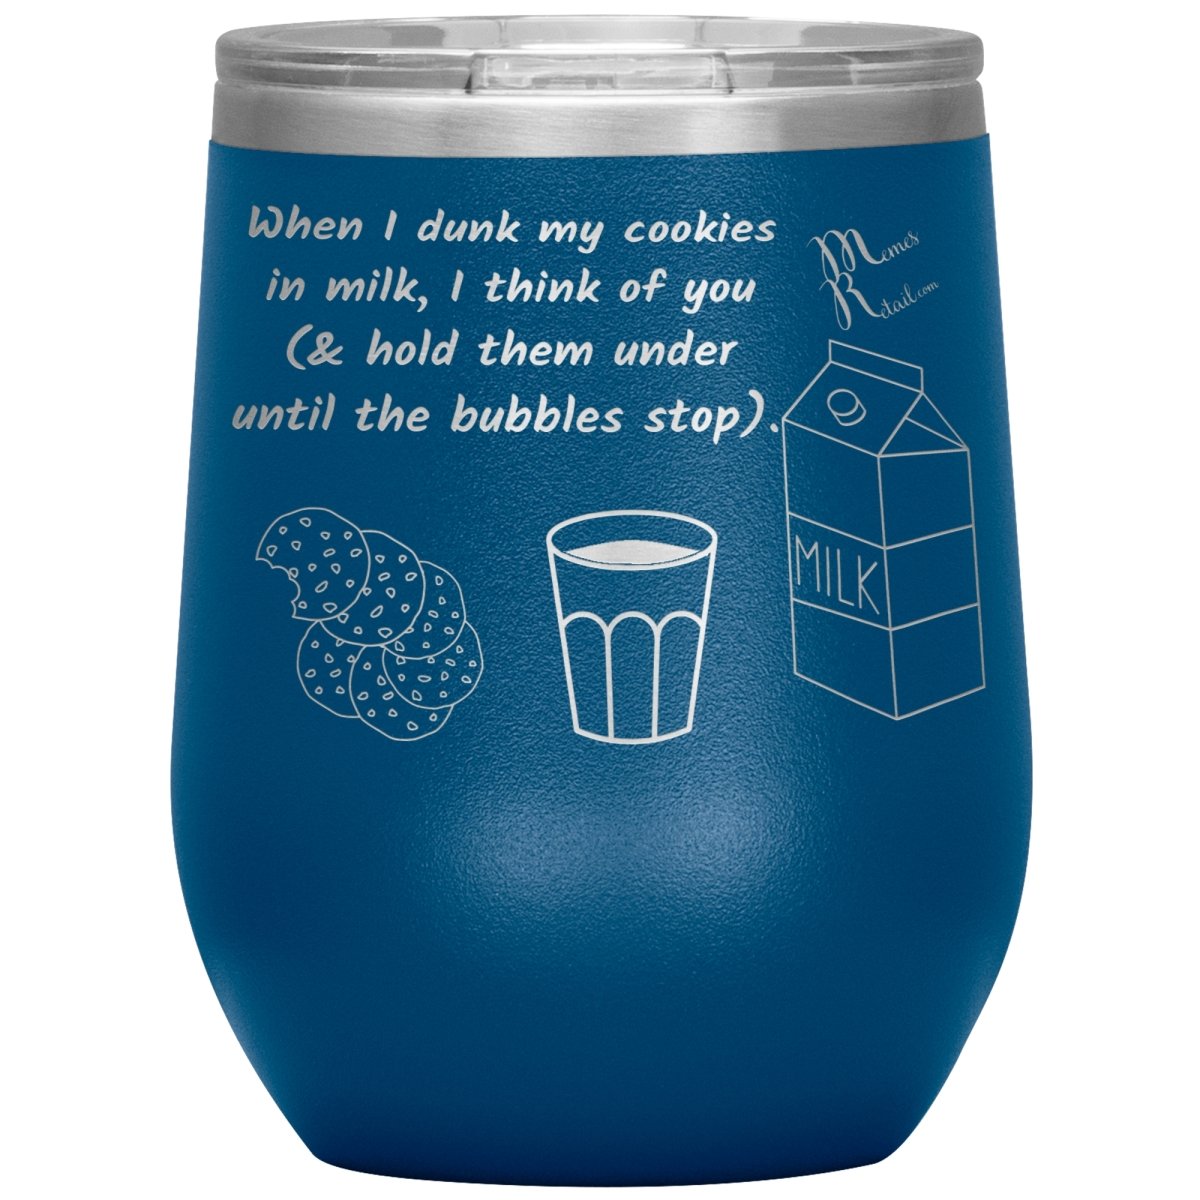 When I dunk My Cookies in Milk, I think of You - Tumblers, 12oz Wine Insulated Tumbler / Blue - MemesRetail.com